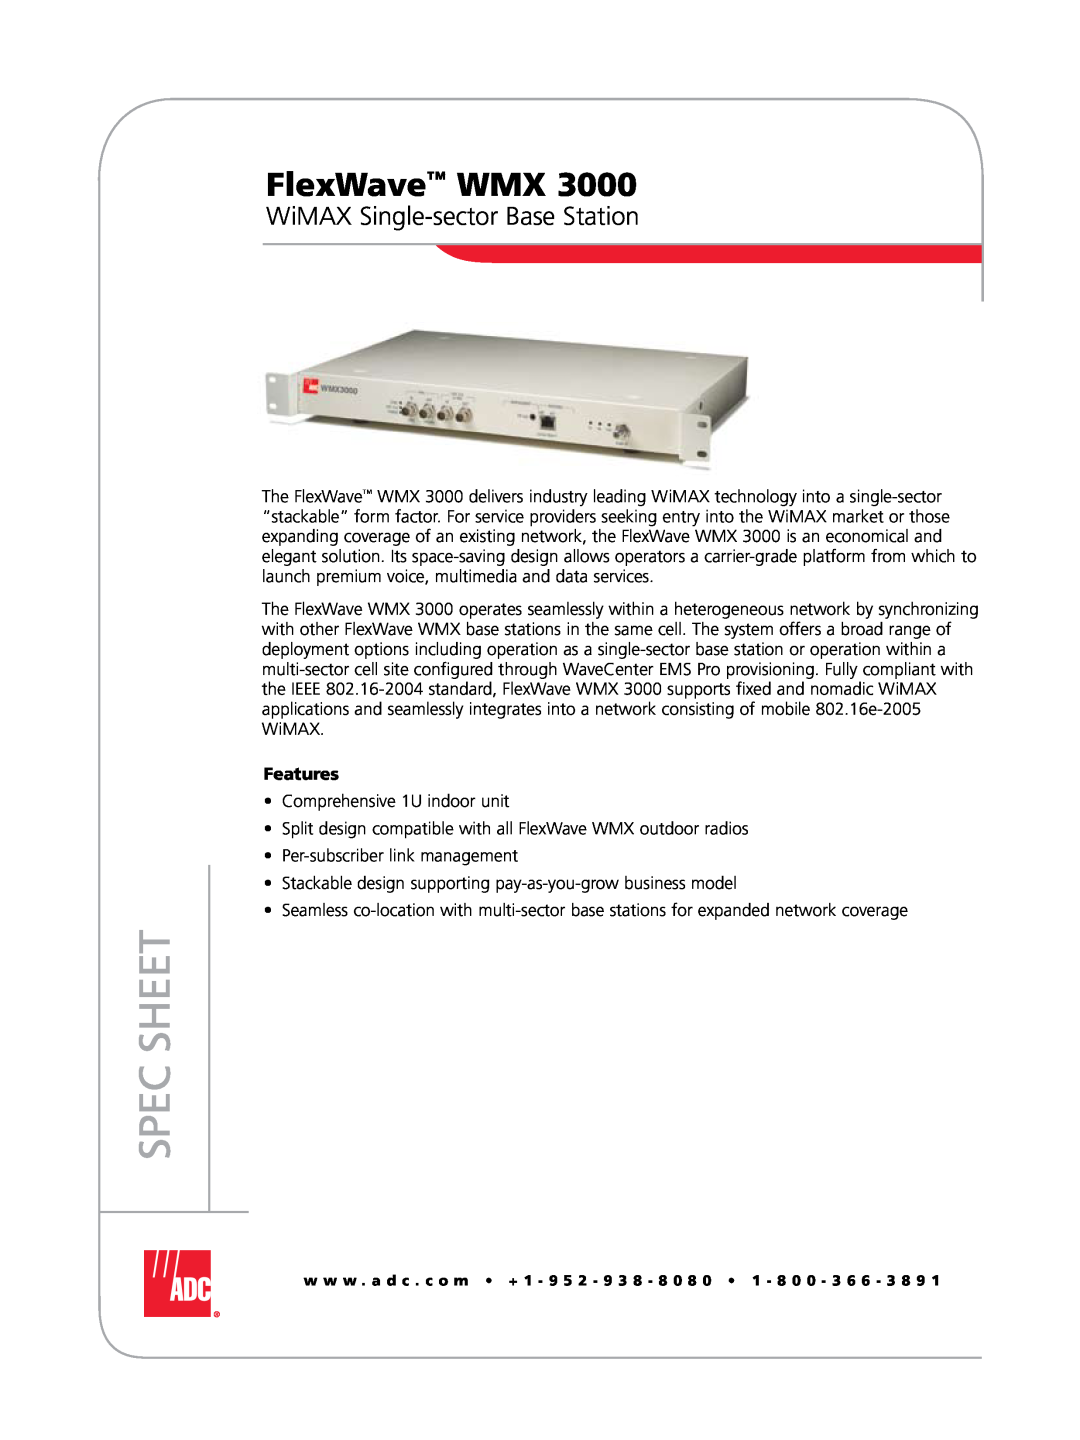 ADC WMX 3000 manual FlexWave WMX, WiMAX Single-sector Base Station, Features, Spec Sheet 